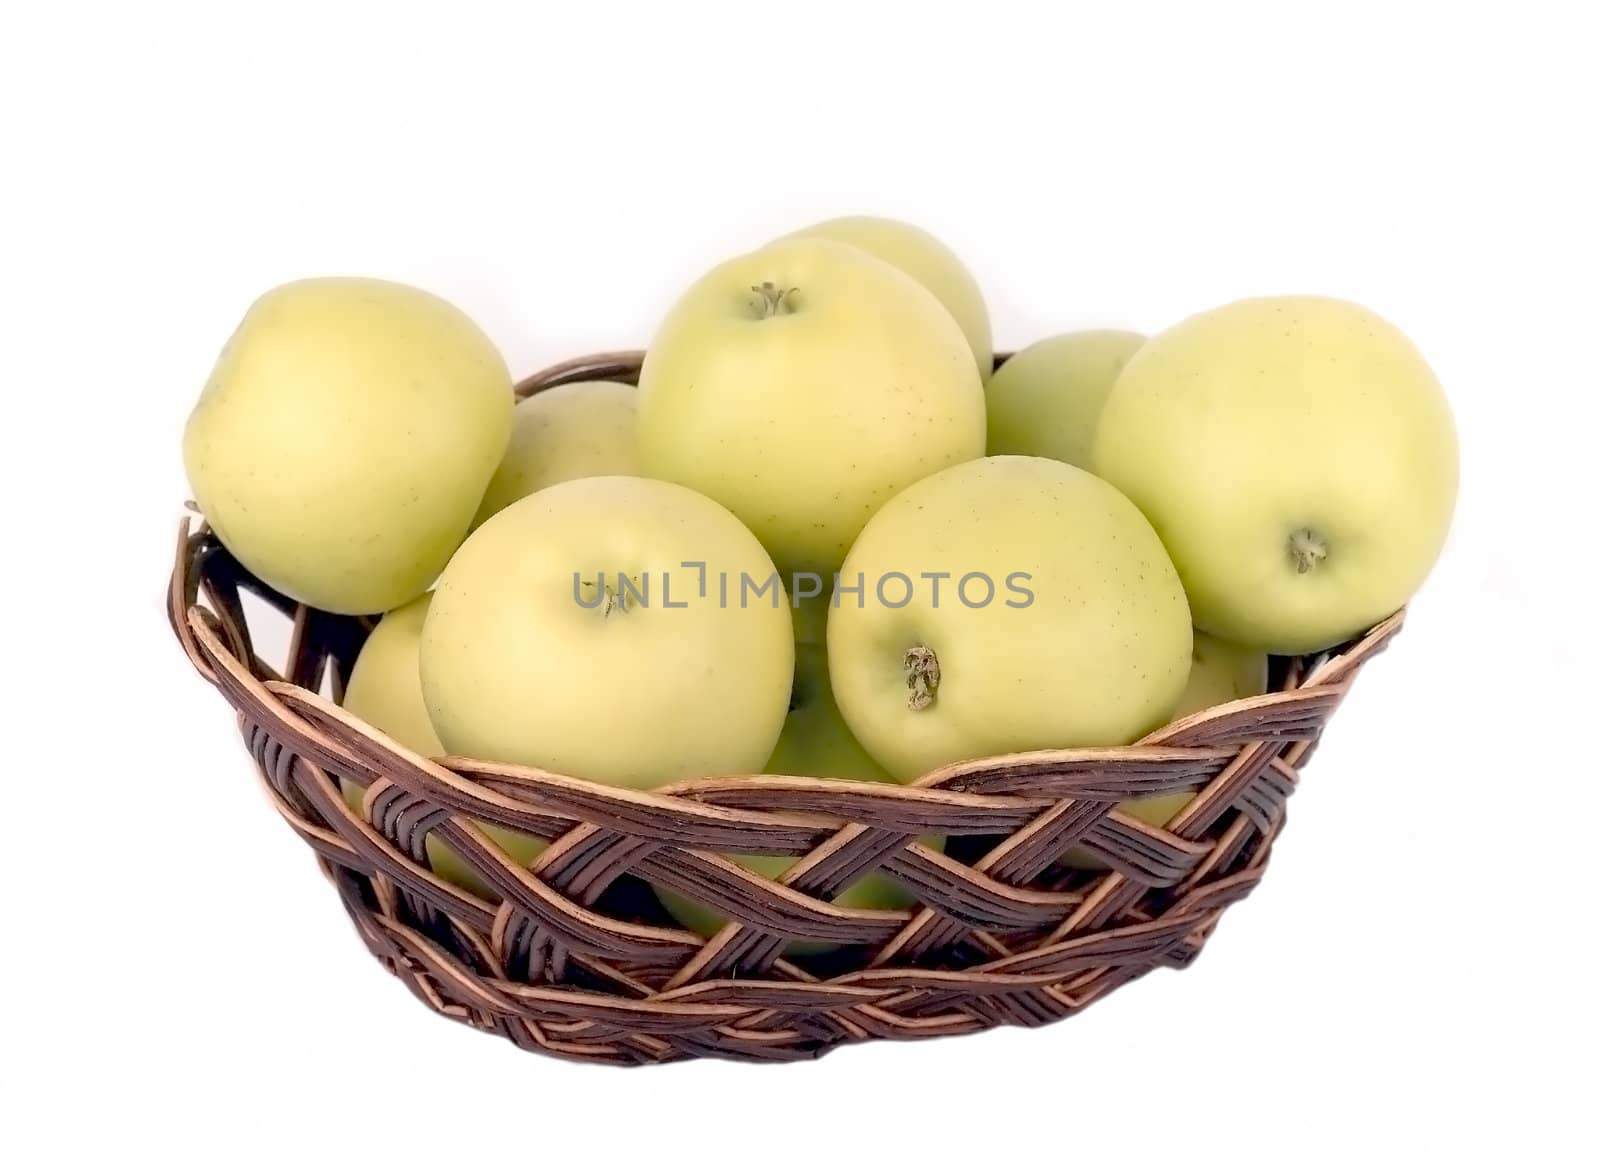 Green apples in a wicker vase on a white background